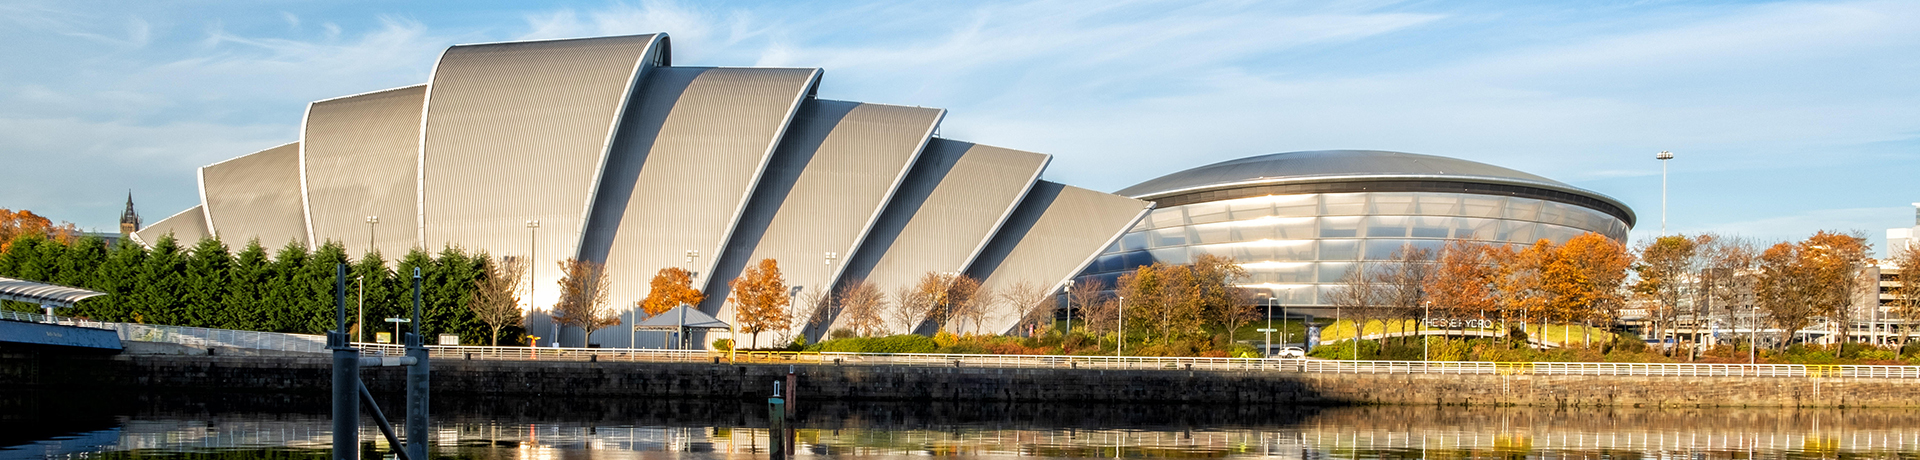 Scottish Exhibition and Conference Centre and The Hydro, Glasgow, Scotland, UK